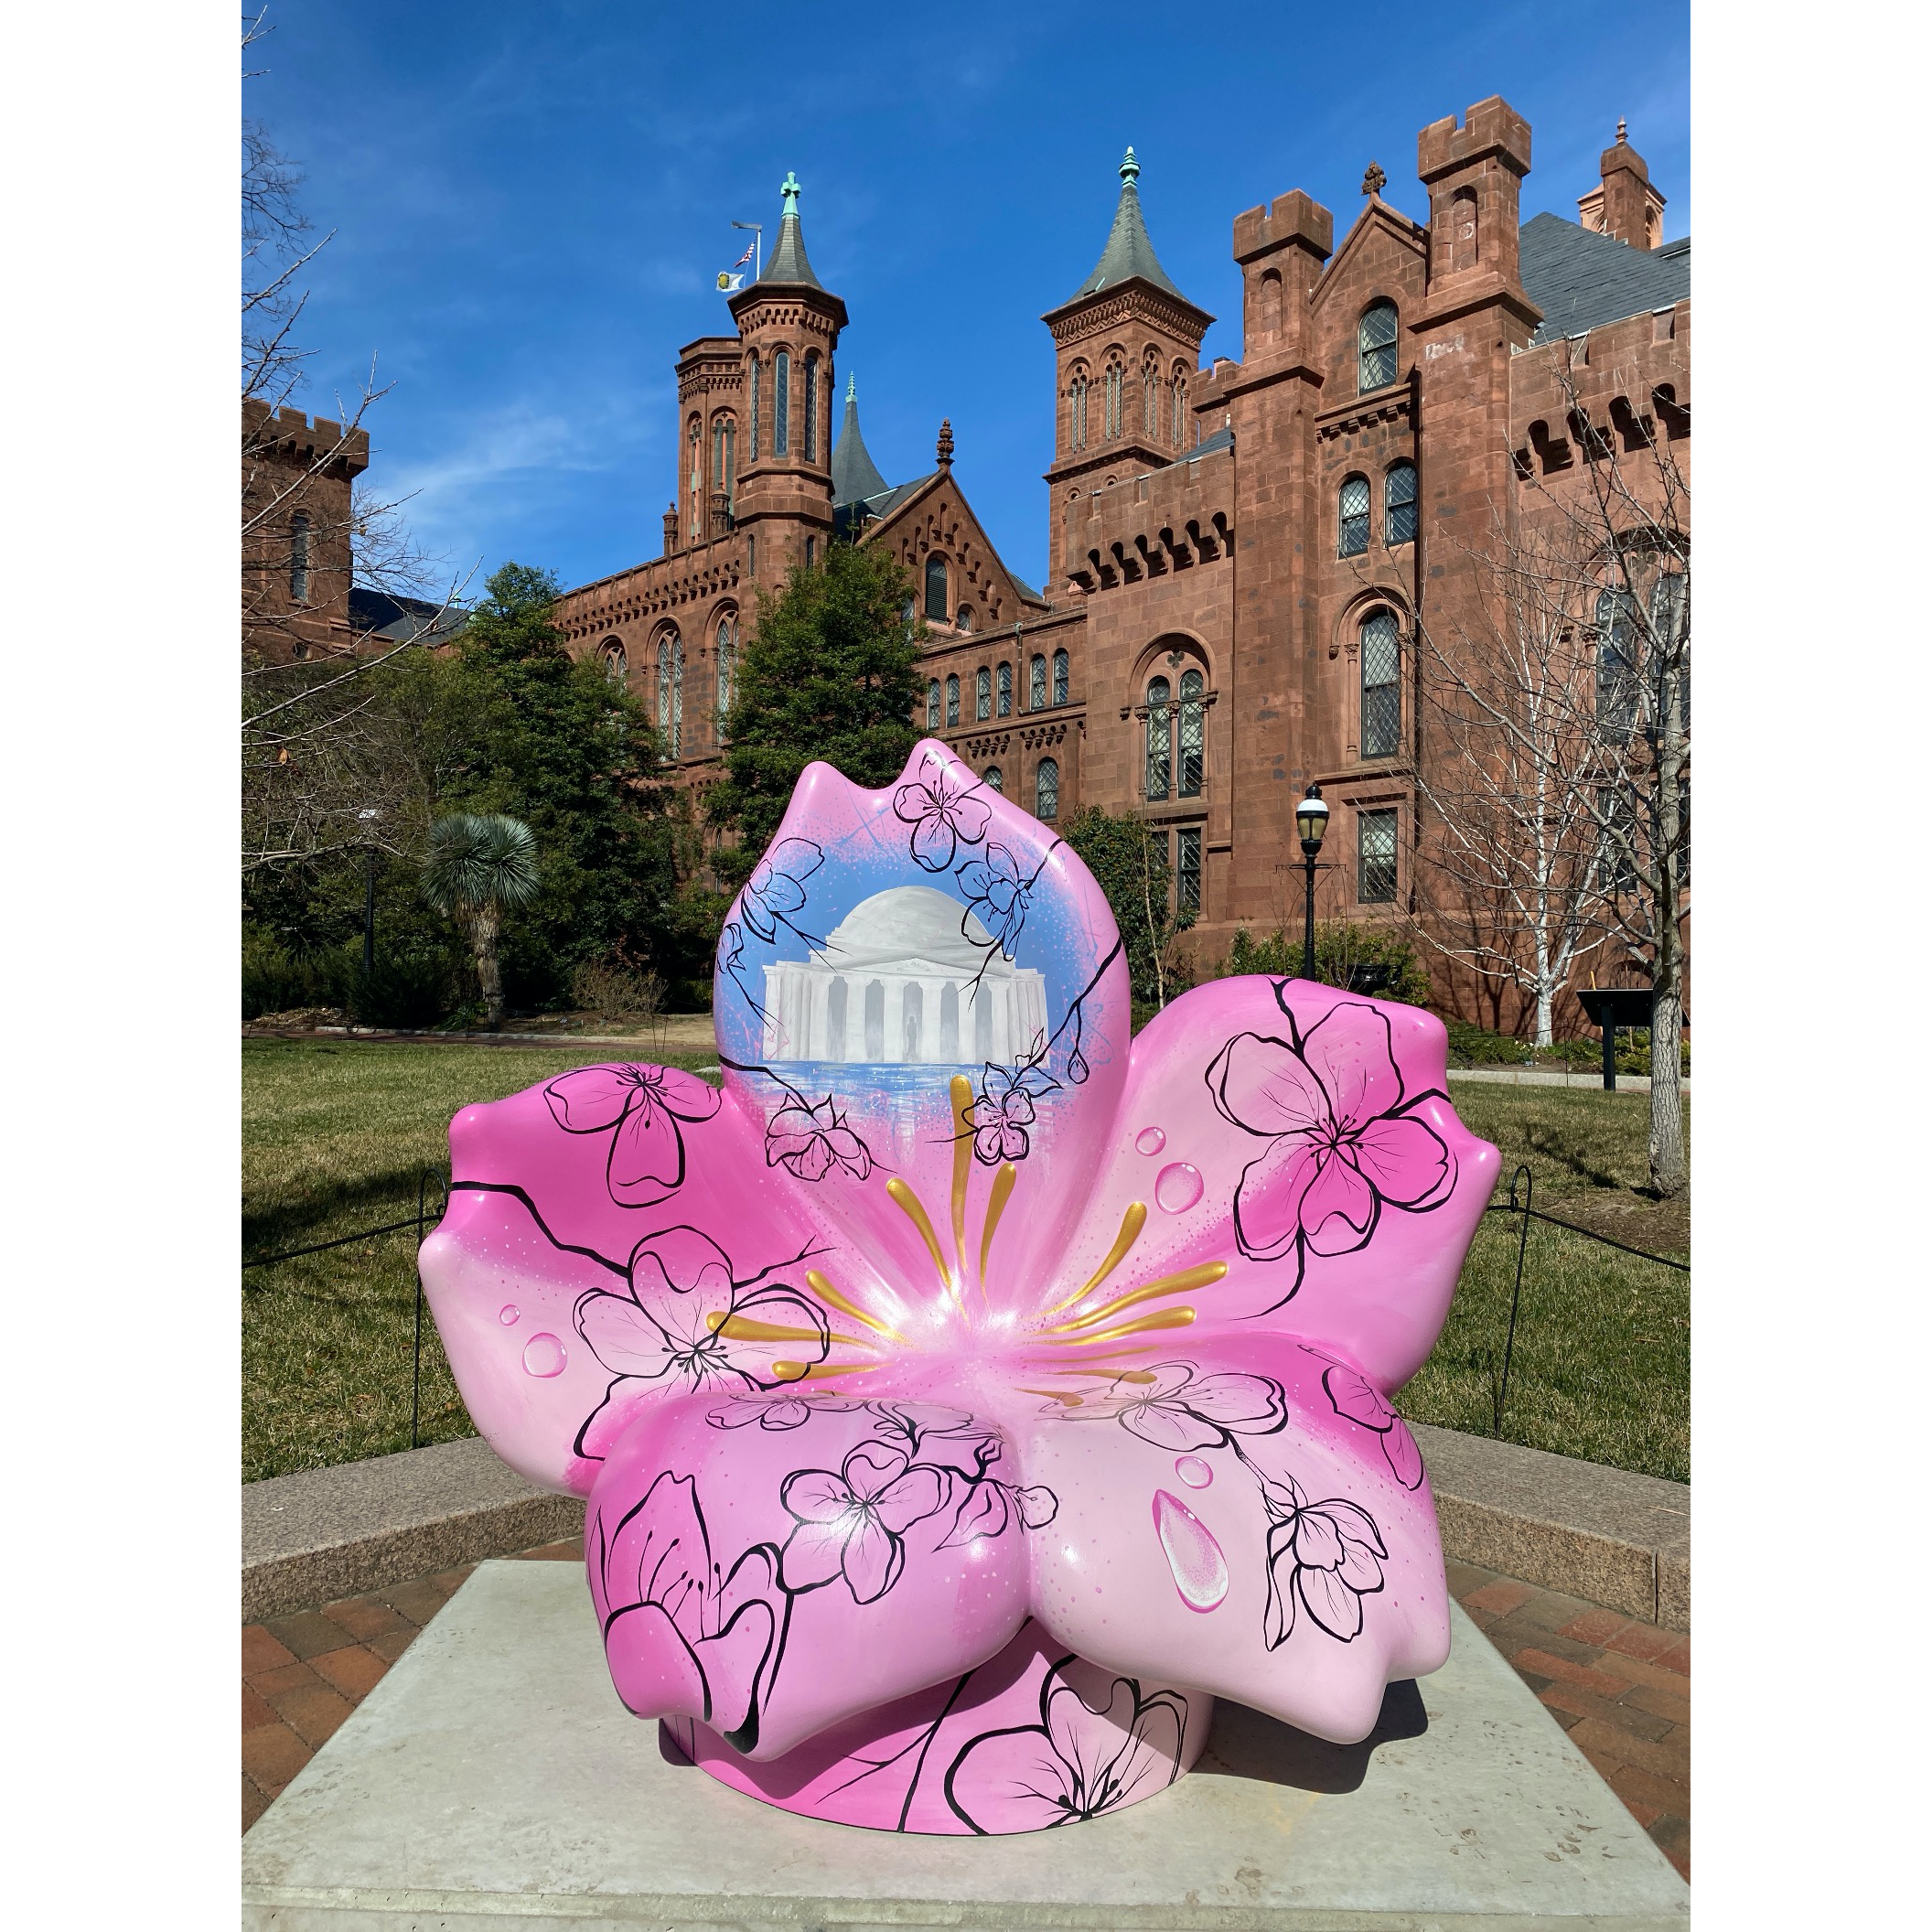 Sculpture shaped like cherry blossom sits in front of Smithsonian Castle